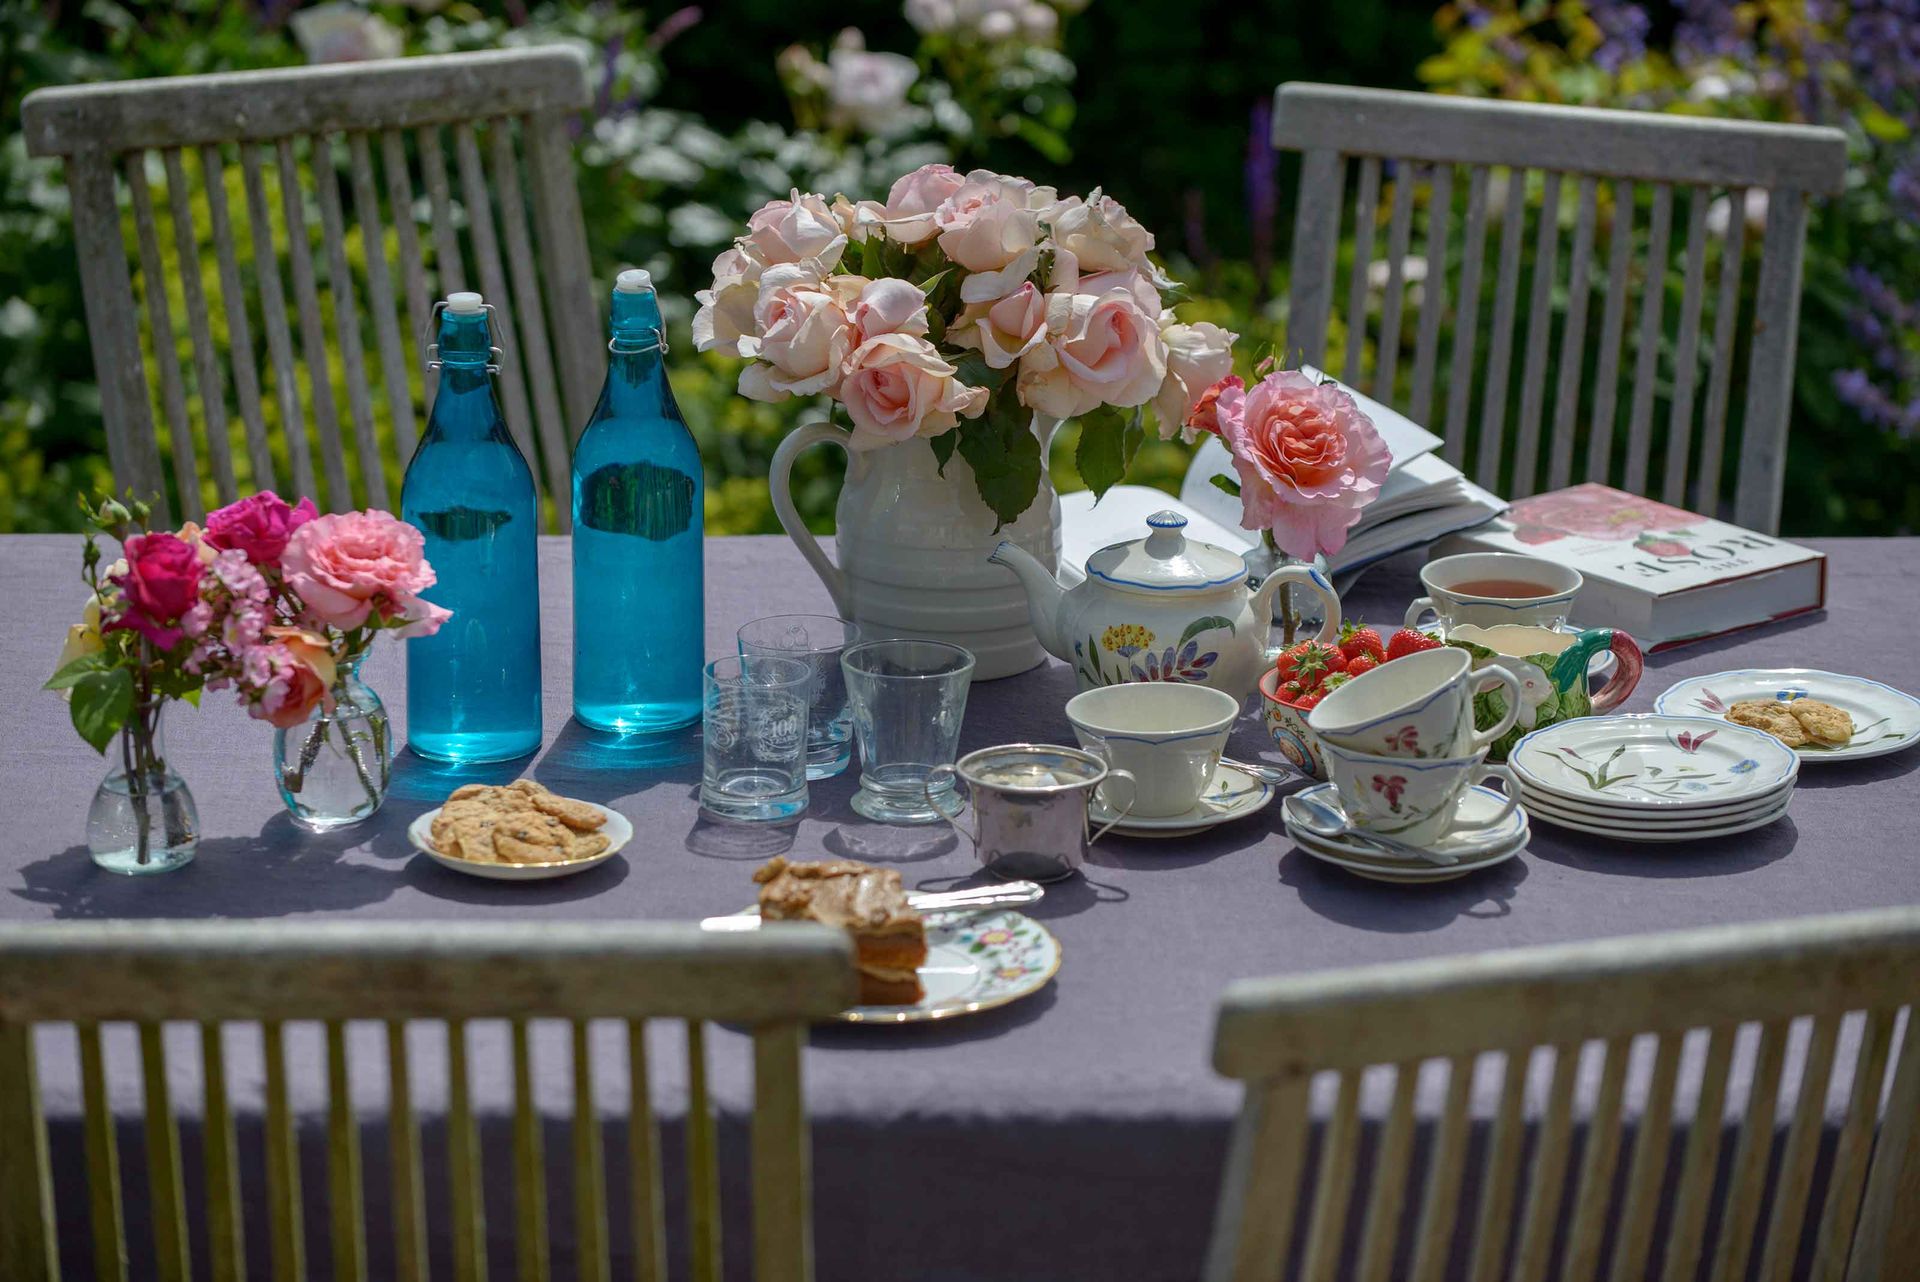 <p>                     Love the romantic charm of cottage garden ideas? Then consider throwing a quintessentially-English garden tea party.                   </p>                                      <p>                     Have a rummage through local thrift stores for vintage tableware – think teapots, sugar bowls, and tiered cake stands. Add a linen table cloth in a pastel hue (or opt for a delicate lace design), serve up a classic sponge and sandwiches, and don't forget plenty of sweetly-scented roses as a centerpiece.                   </p>